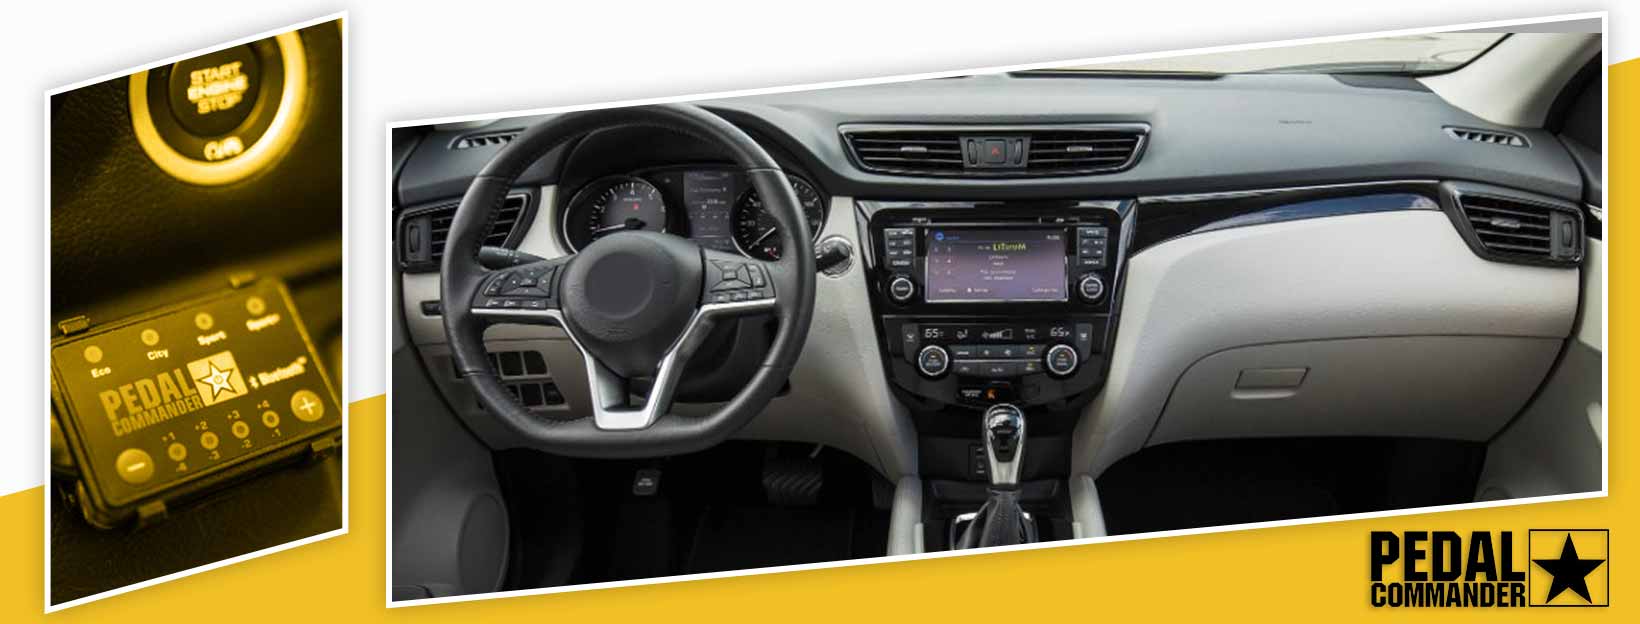 Pedal Commander for Nissan Rogue Sport - interior